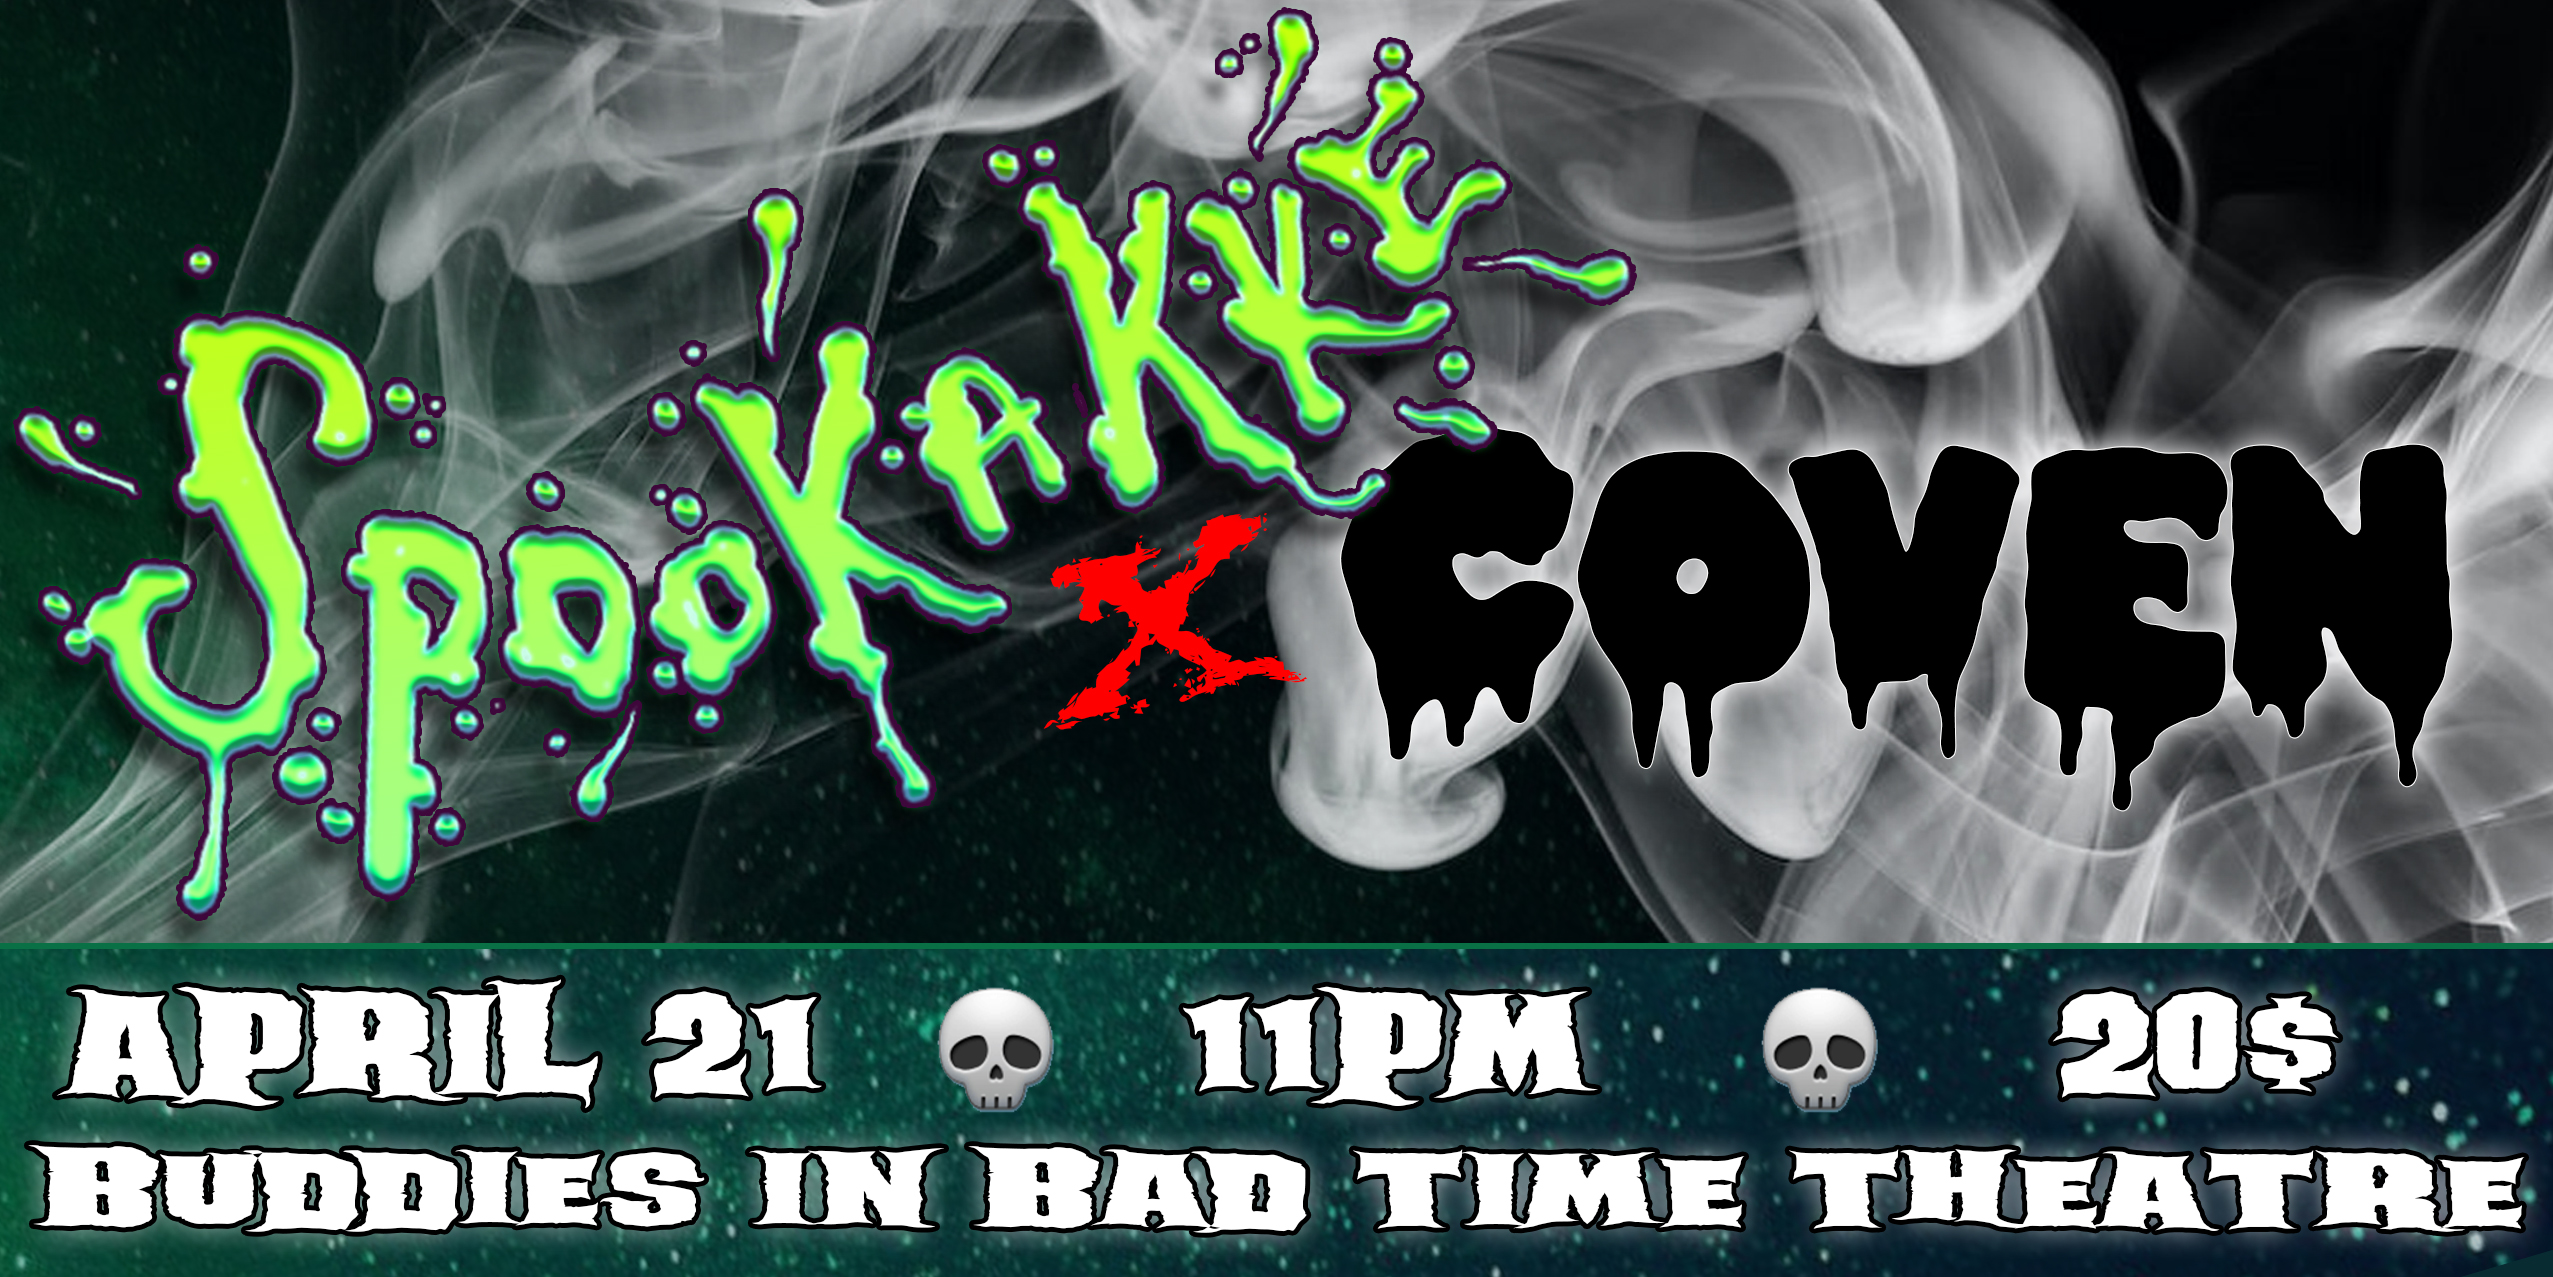 Promotional image for Spookakke: Coven. Image backdrop is a trail of smoke dissipating into the air. Title text reads: “Spookakke x Coven”. The letters are written in an oozing liquid like texture. Secondary text reads: “April 21, 11pm, 20 dollars. Buddies in Bad TImes Theatre.”